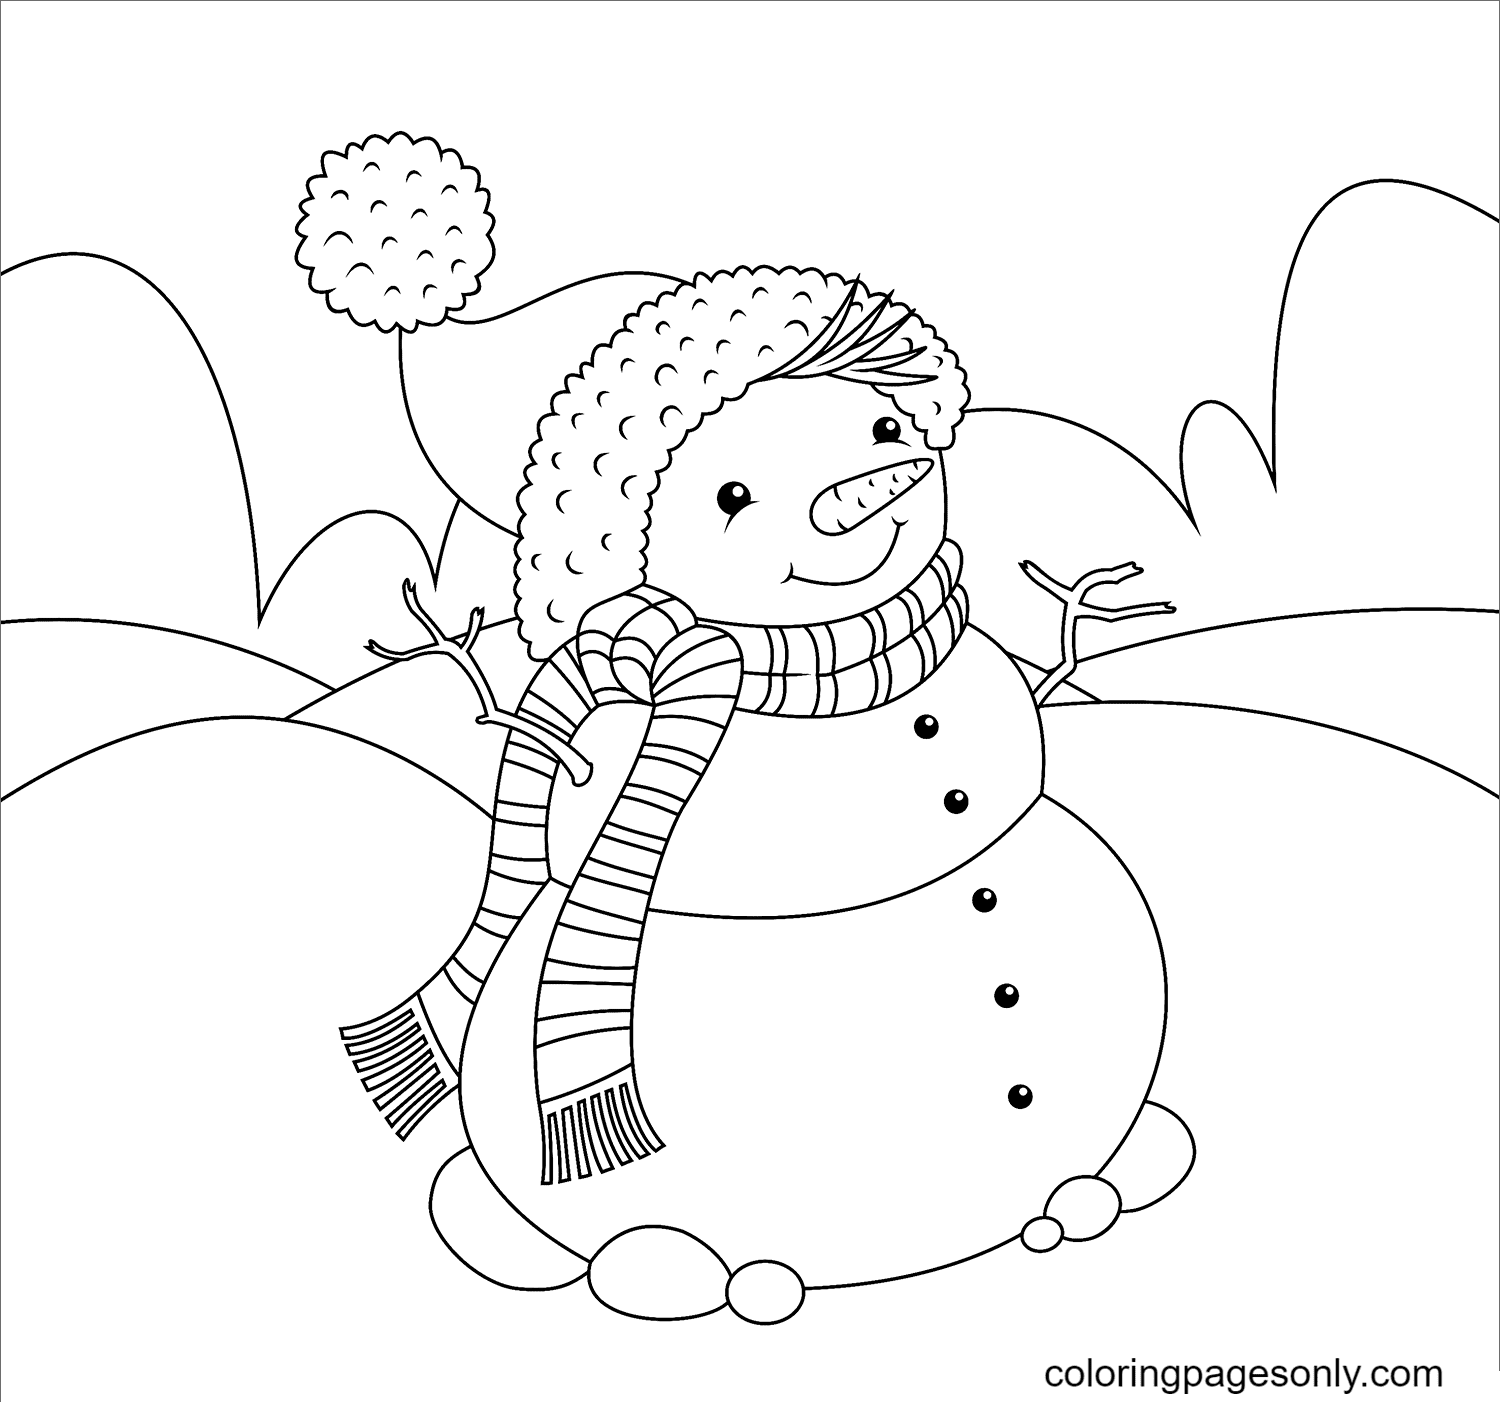 Christmas Snowman Coloring Page